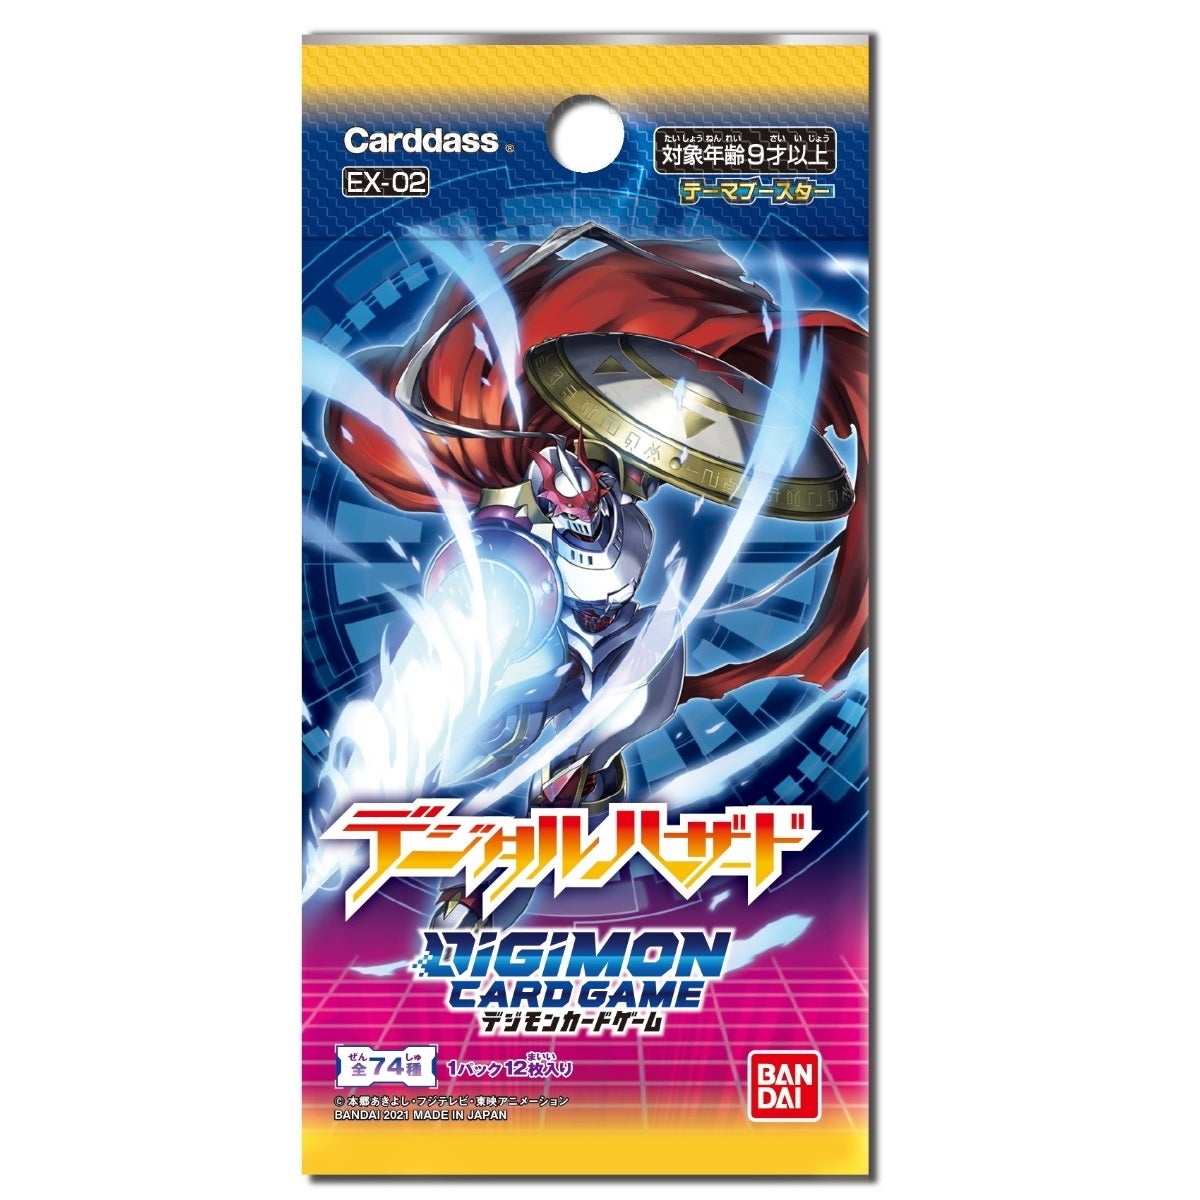 Digimon Card Game Theme Booster "Digital Hazard" [EX-02] (Japanese)-Booster Box (12packs)-Bandai-Ace Cards & Collectibles